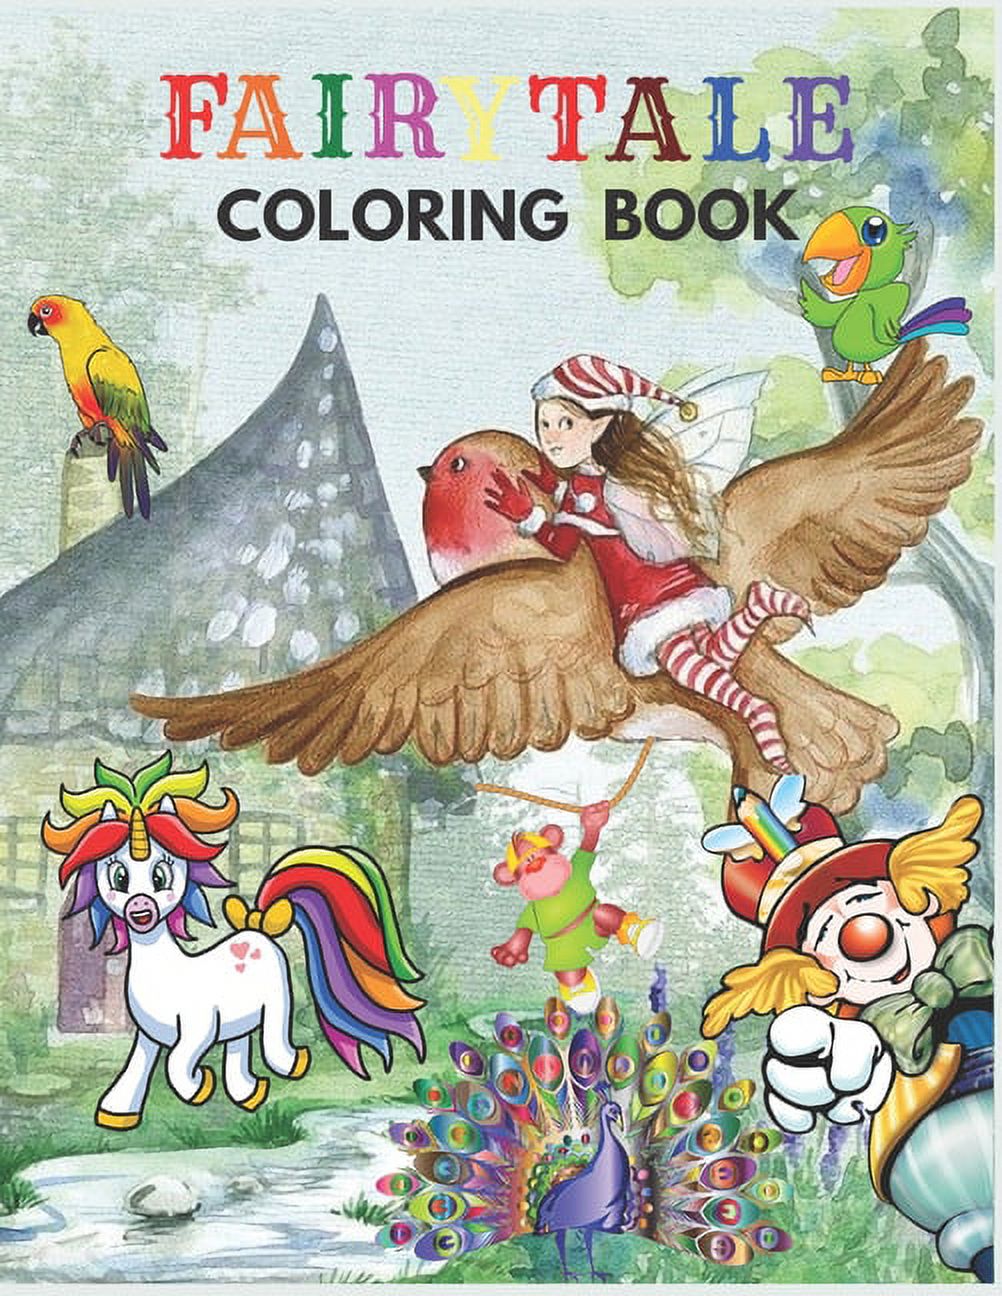 Fairytale Coloring Book: For Kids and Adult, Great Gift Coloring Book ( for Boys & Girls ) [Book]